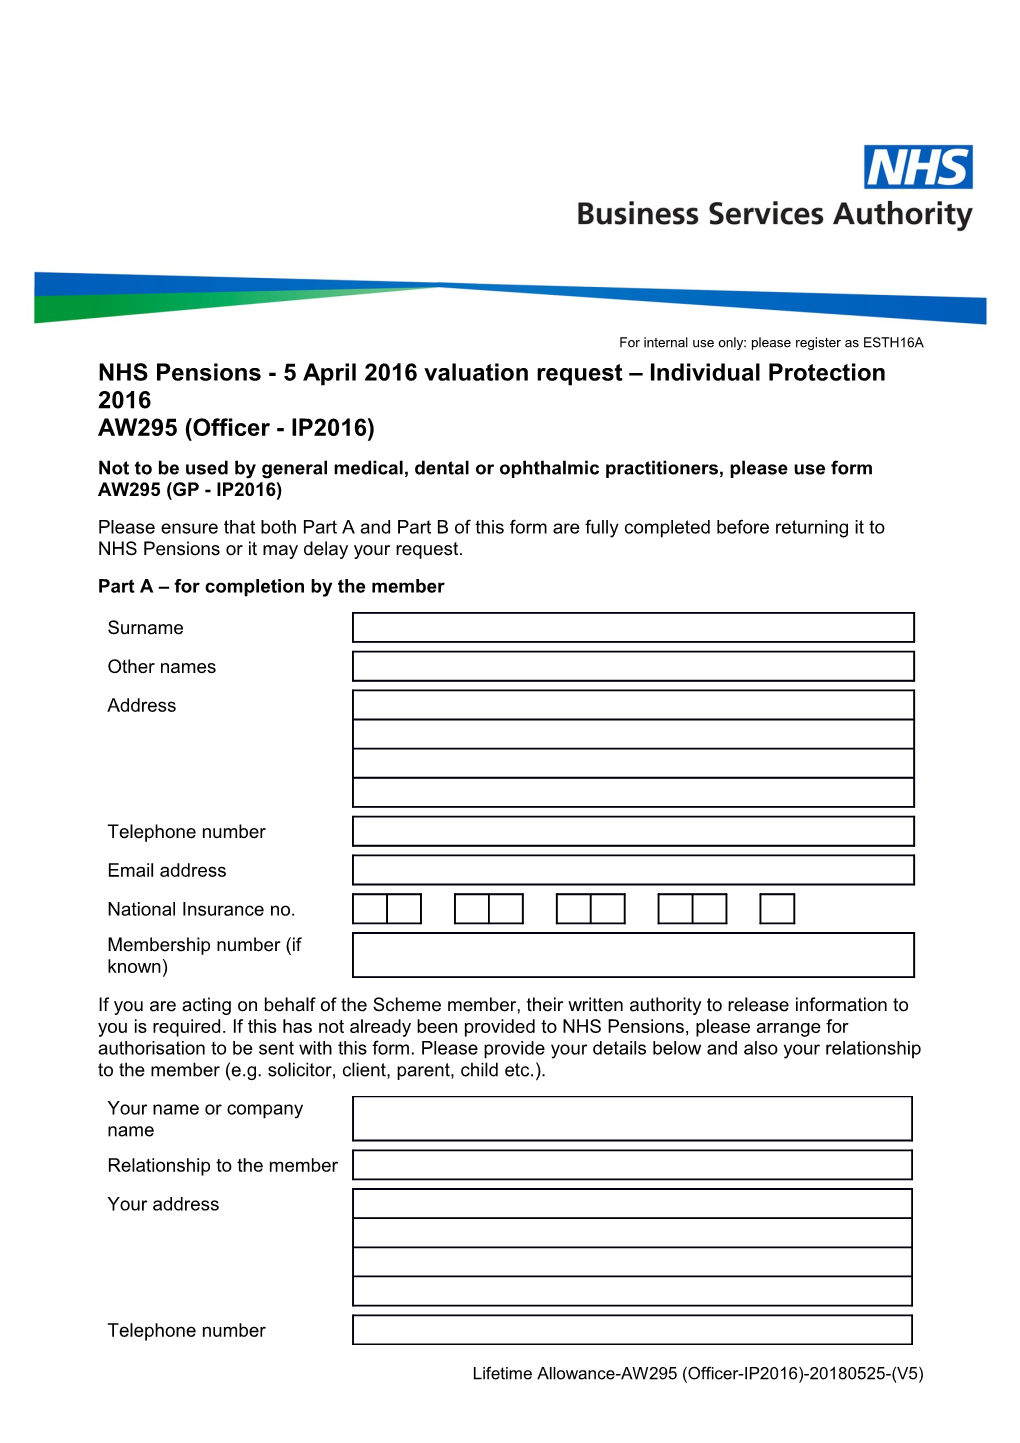 Not to Be Used by General Medical, Dental Or Ophthalmic Practitioners, Please Use Form